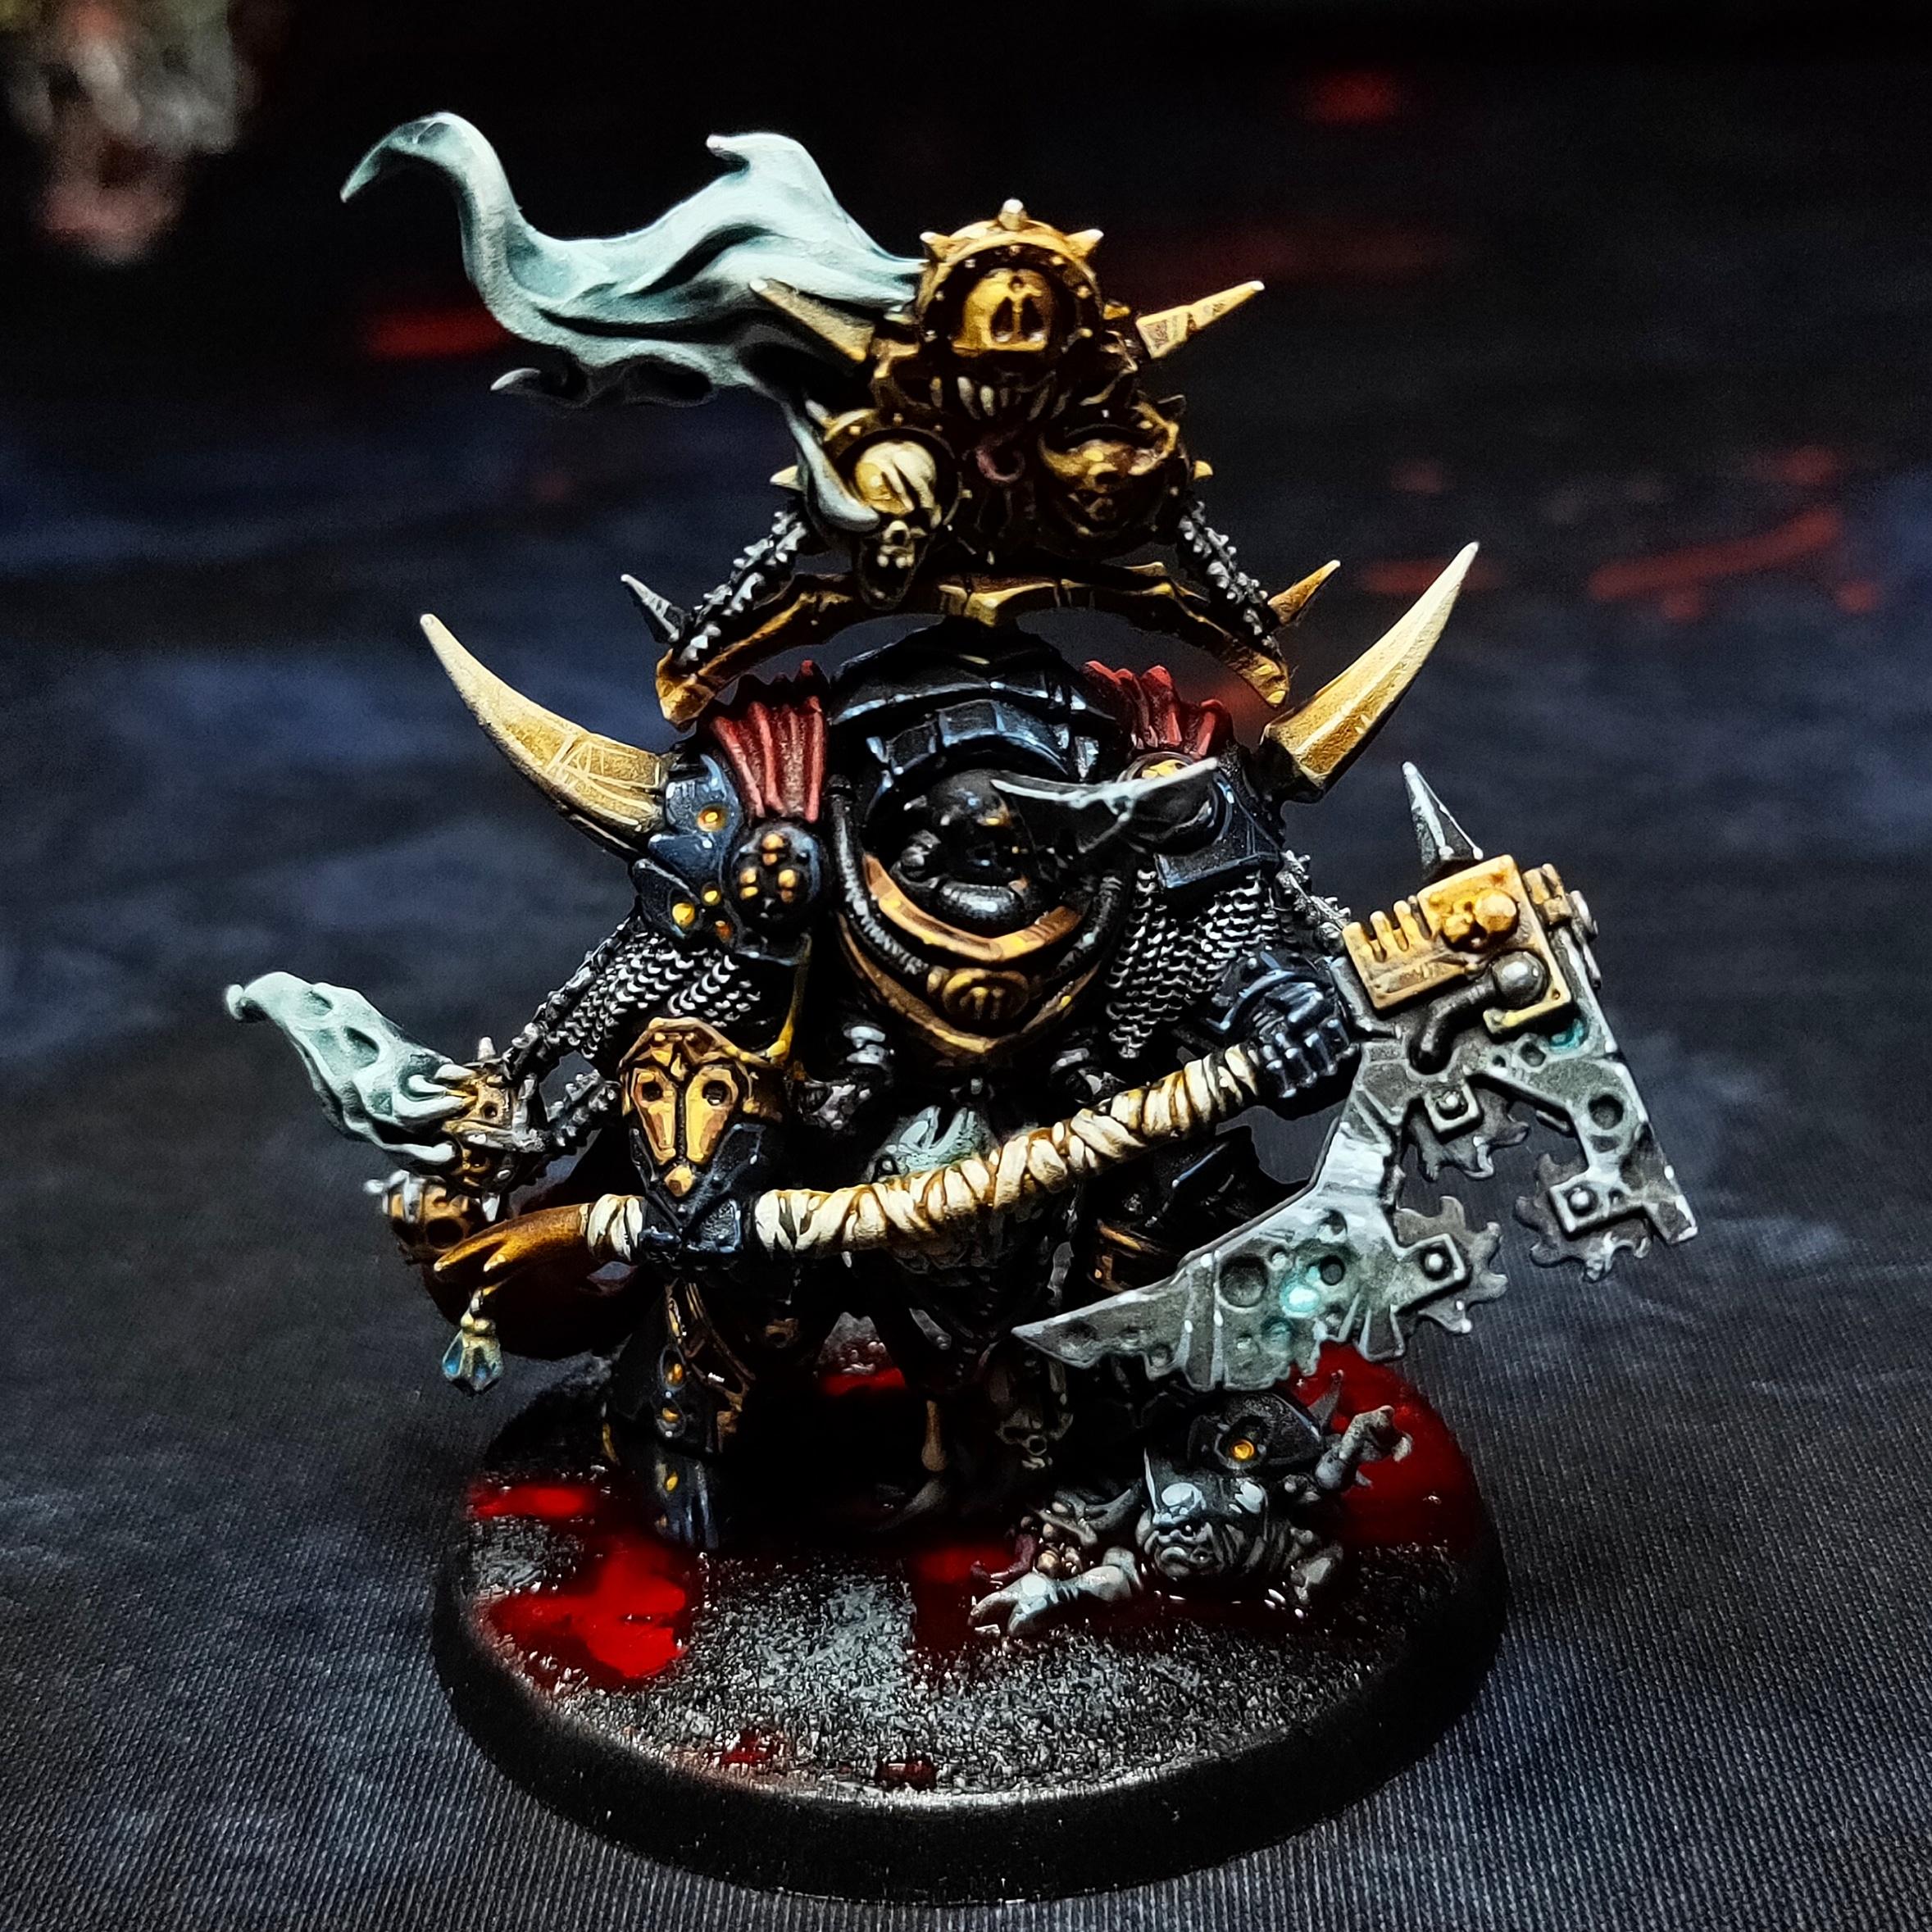 Black Legion, Bringers Of Decay, Chaos, Chaos Knight, Chaos Space Marines, Chaos Undivided, Dark Imperium, Death Guard, Heretic Astartes, Lord Of Contagion, Plague Marines, Sin Eaters, Warhammer 40,000